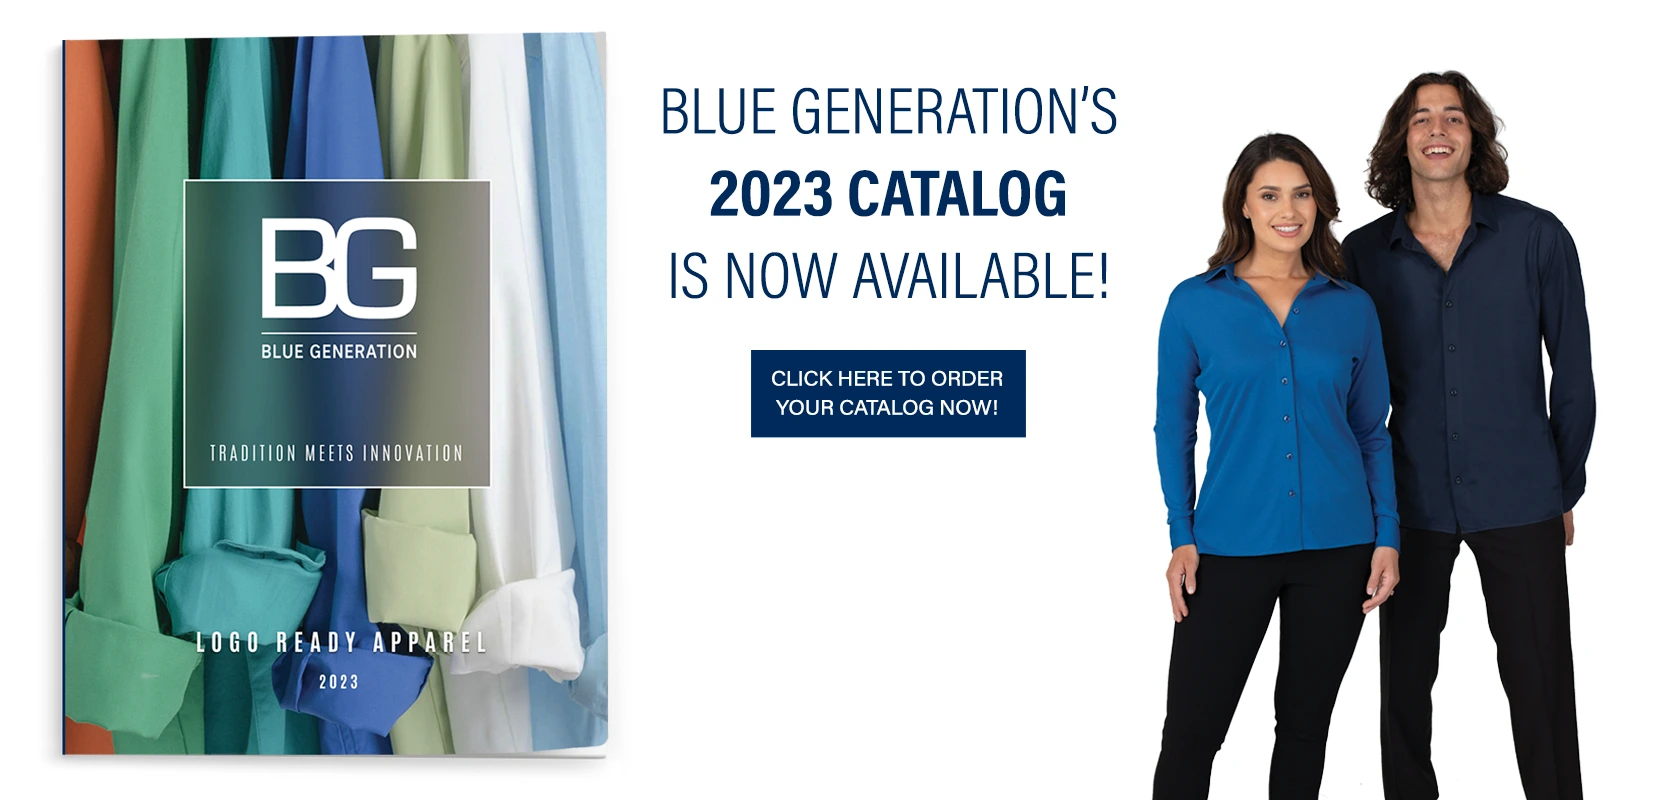 Order your 2023 catalog now!